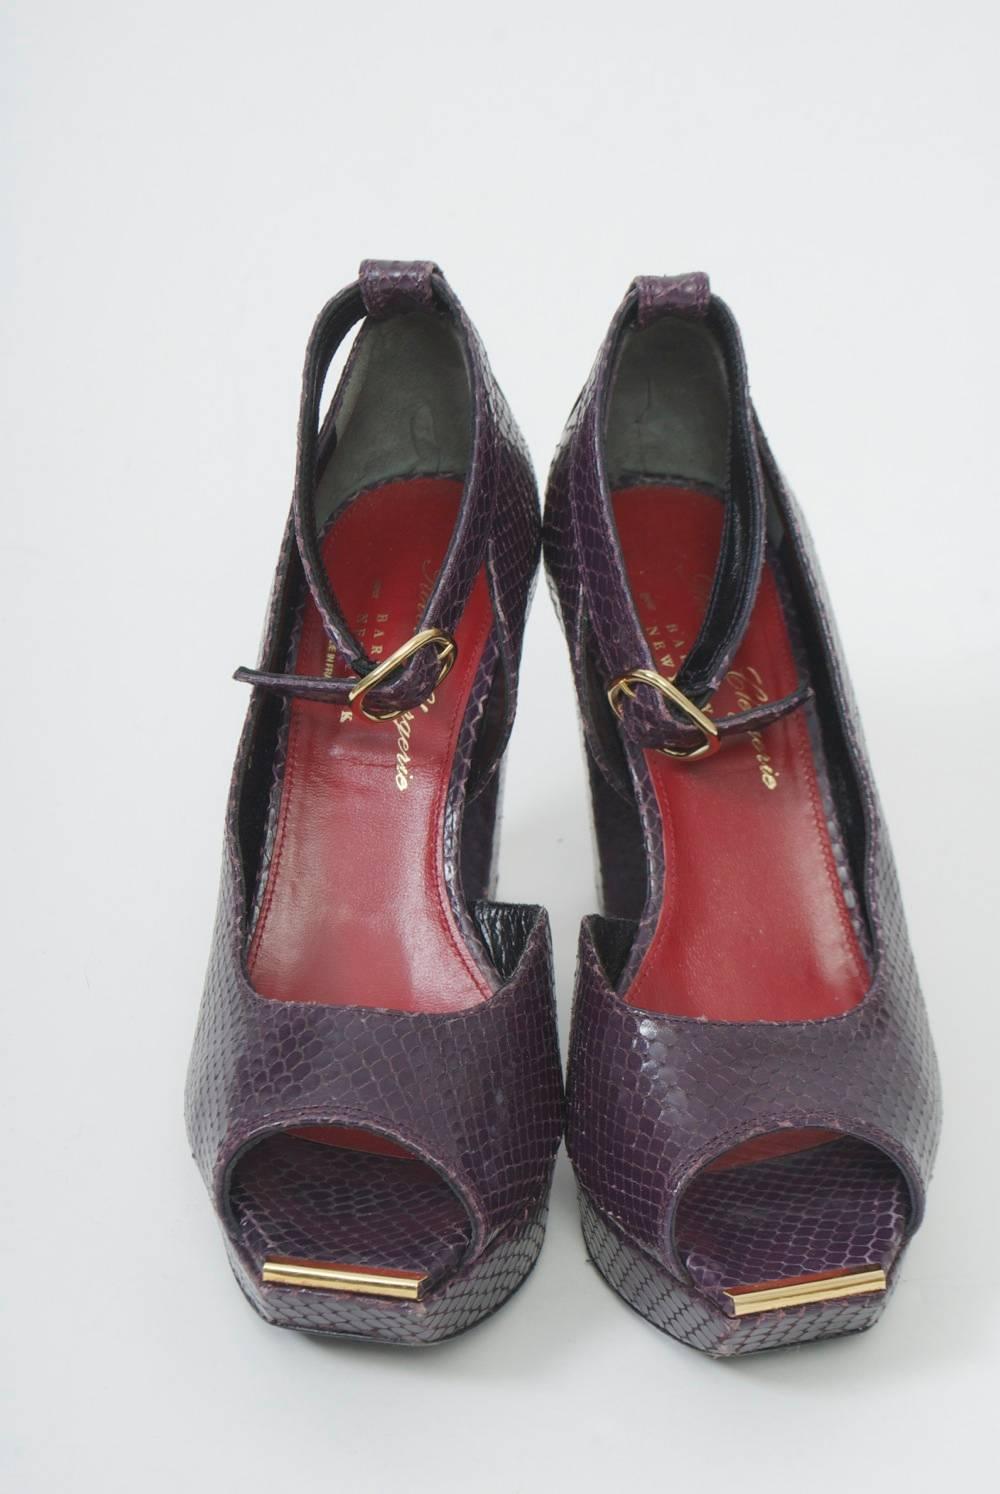 Clergerie Plum Snake Platform Shoes In Excellent Condition For Sale In Alford, MA